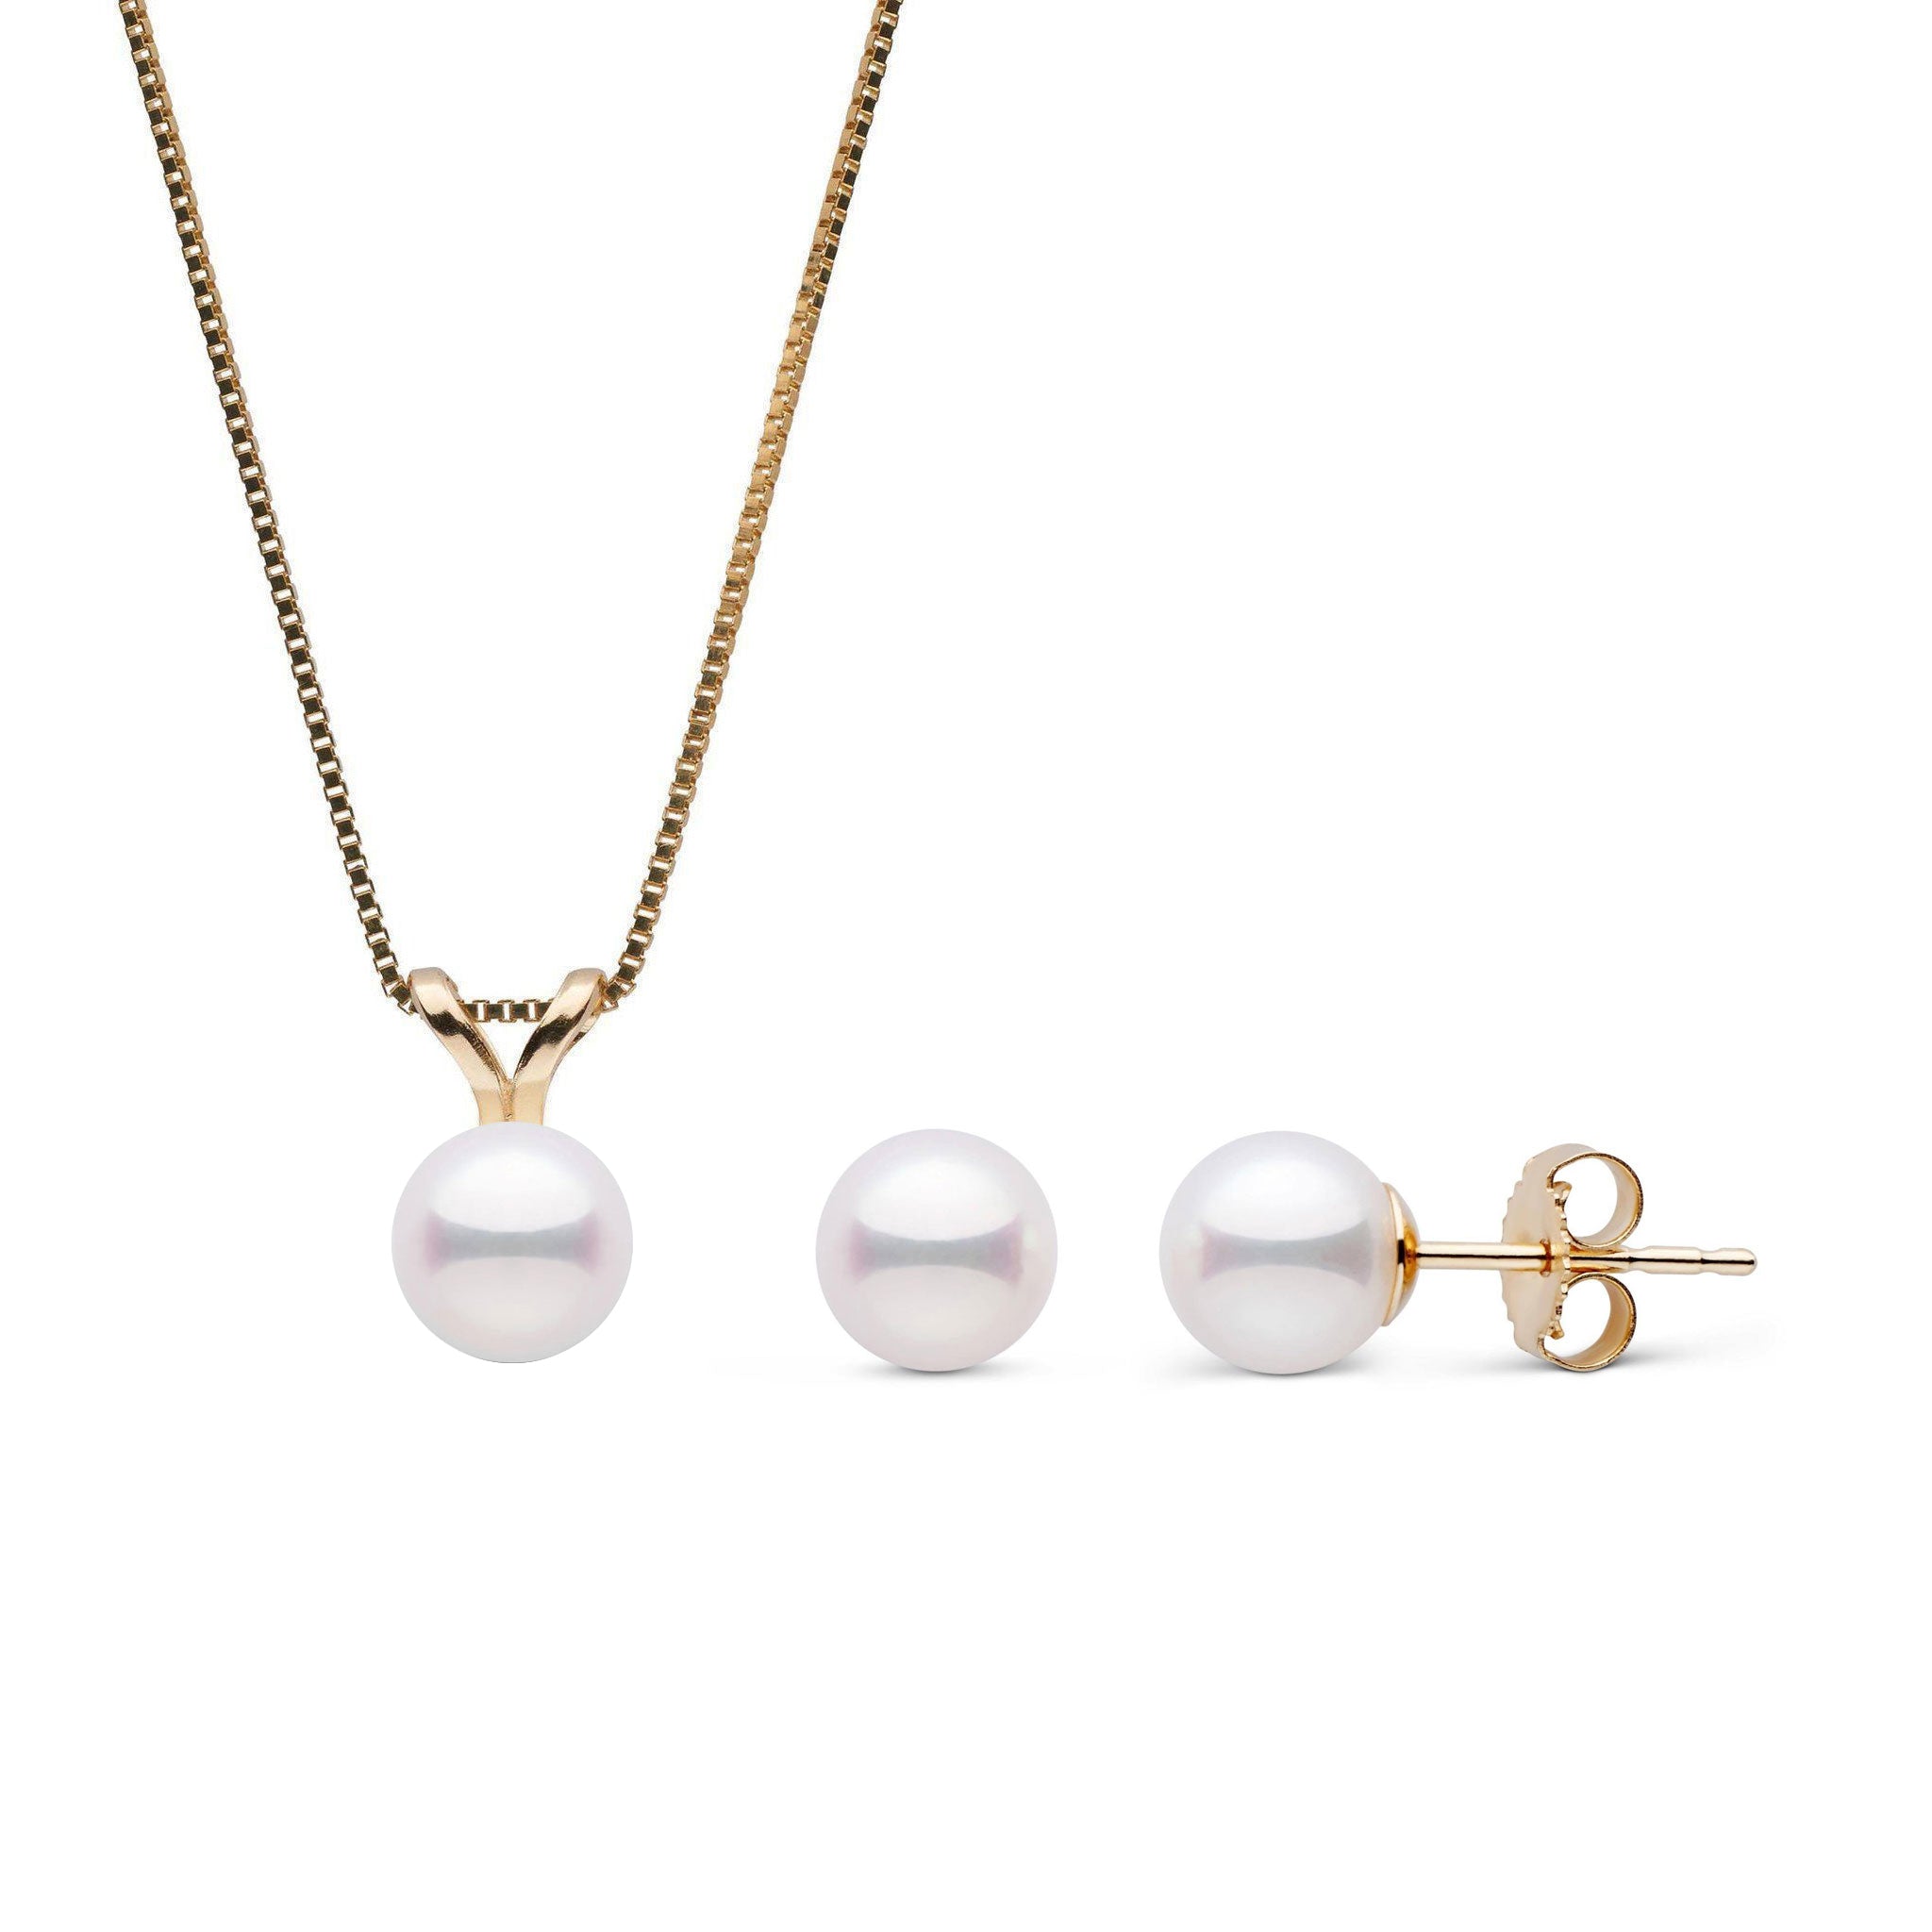 6.0-6.5 mm Akoya Pearl Unity Collection Pendant and Earrings Set Yellow Gold